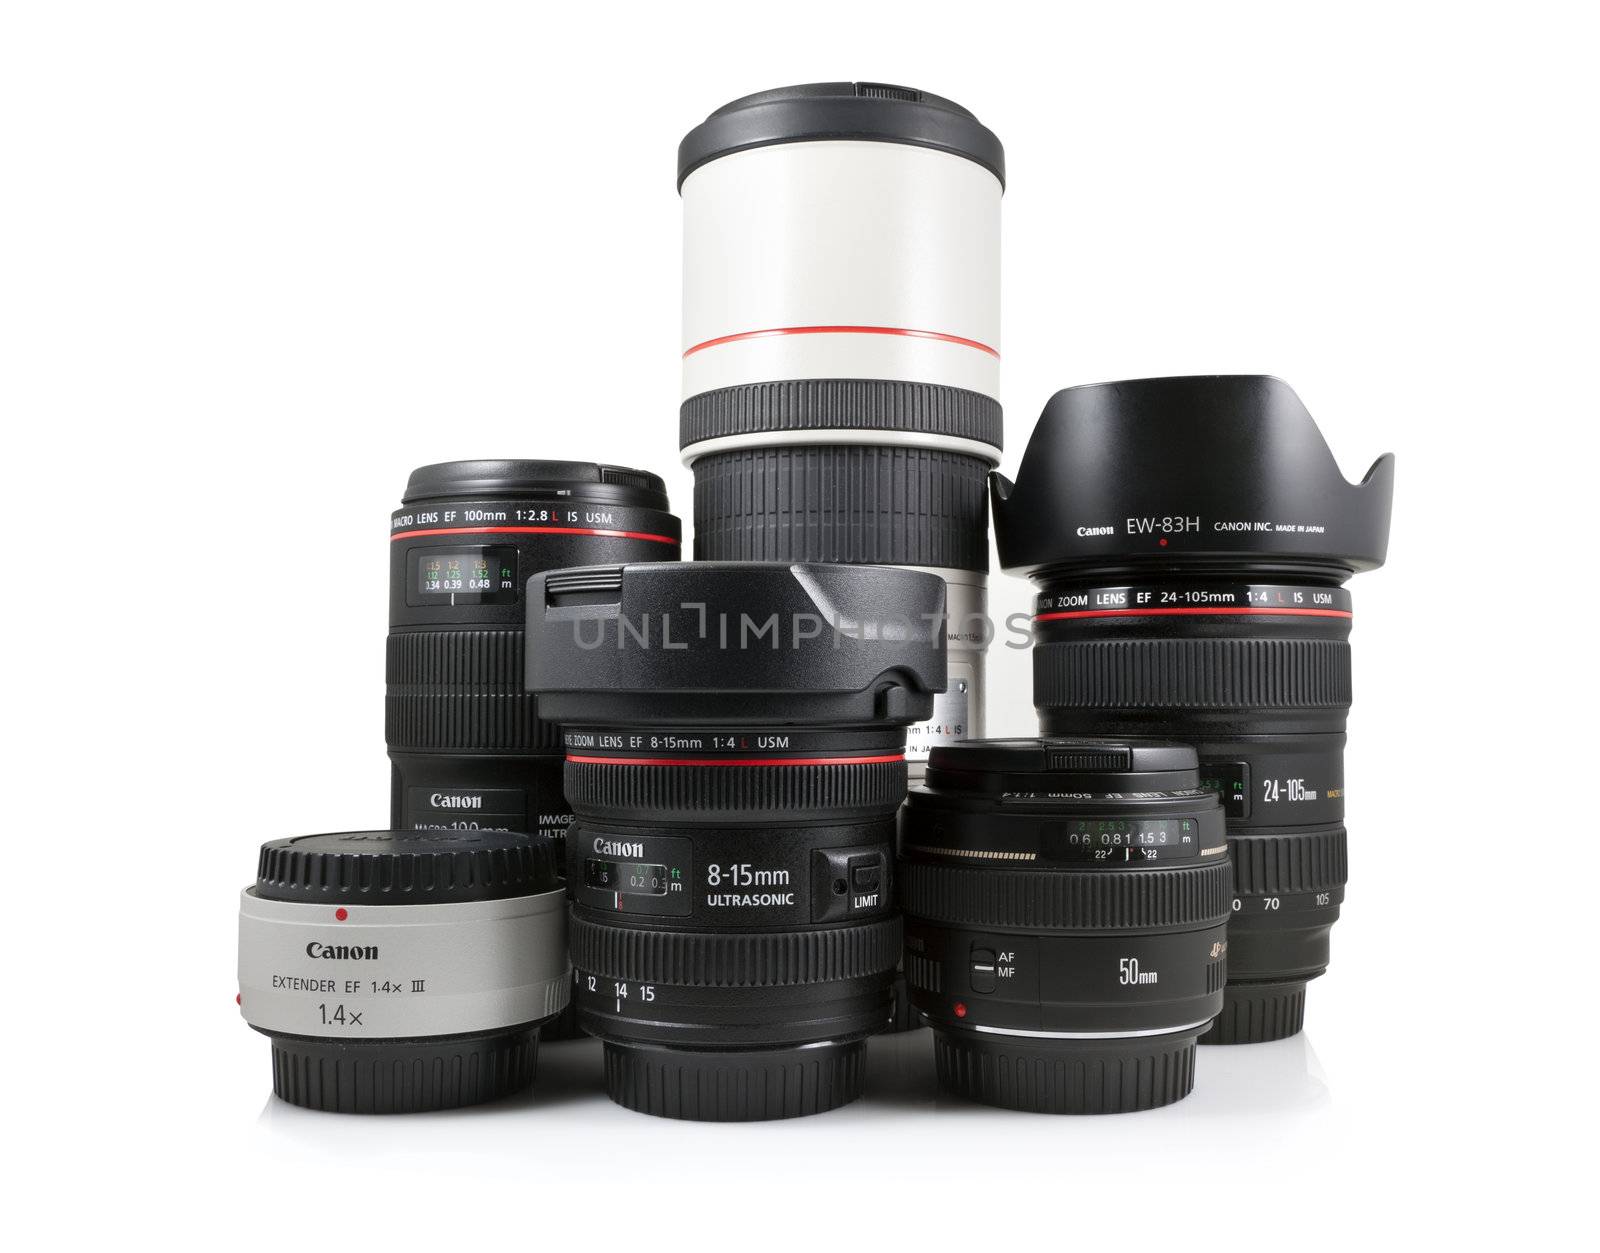 A studio shot on a white background of a collection of Canon lenses including the EF 300mm f/4L IS USM, EF 24-105 f/4L IS USM, EF 100mm f/2.8L Macro IS USM, EF 50mm f/1.4 USM, EF 8-15mm f/4L Fisheye USM, and EF 1.4X III extender.